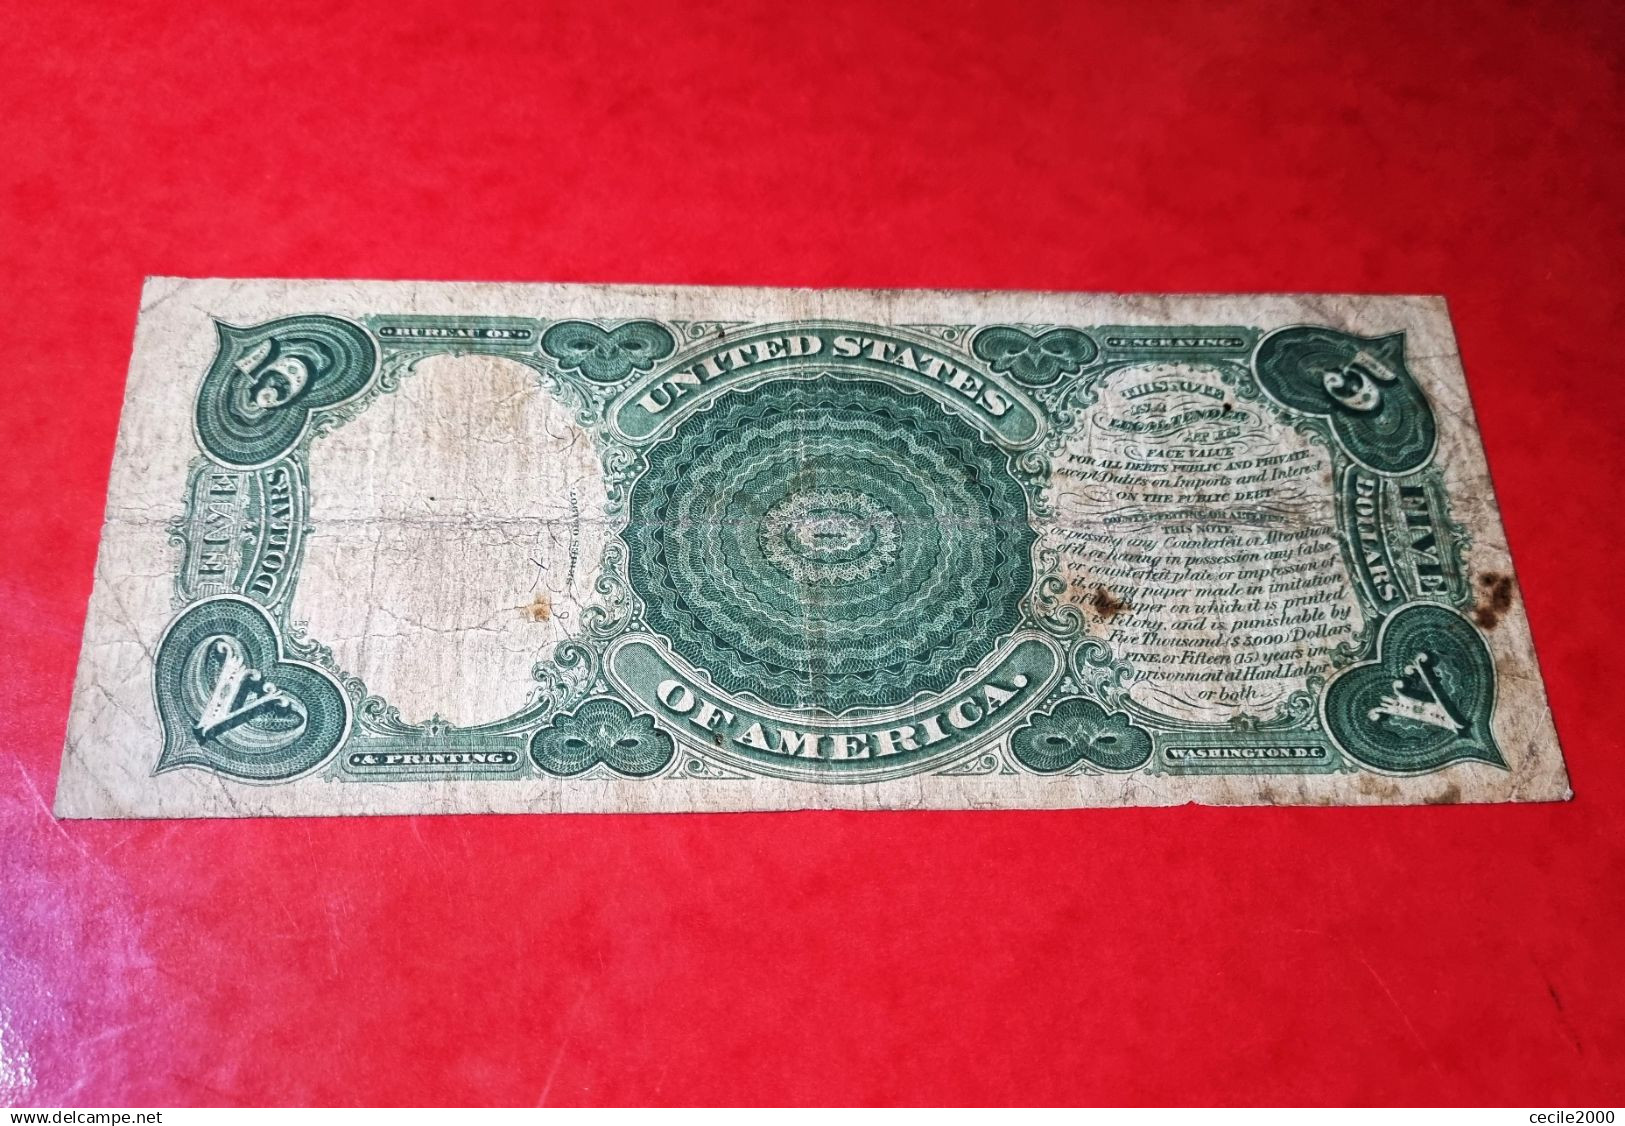 1907 USA $5 DOLLAR *RED SEAL NOTE* UNITED STATES BANKNOTE F+ BILLETE USA COMPRA MULTIPLE CONSULTAR - United States Notes (1862-1923)